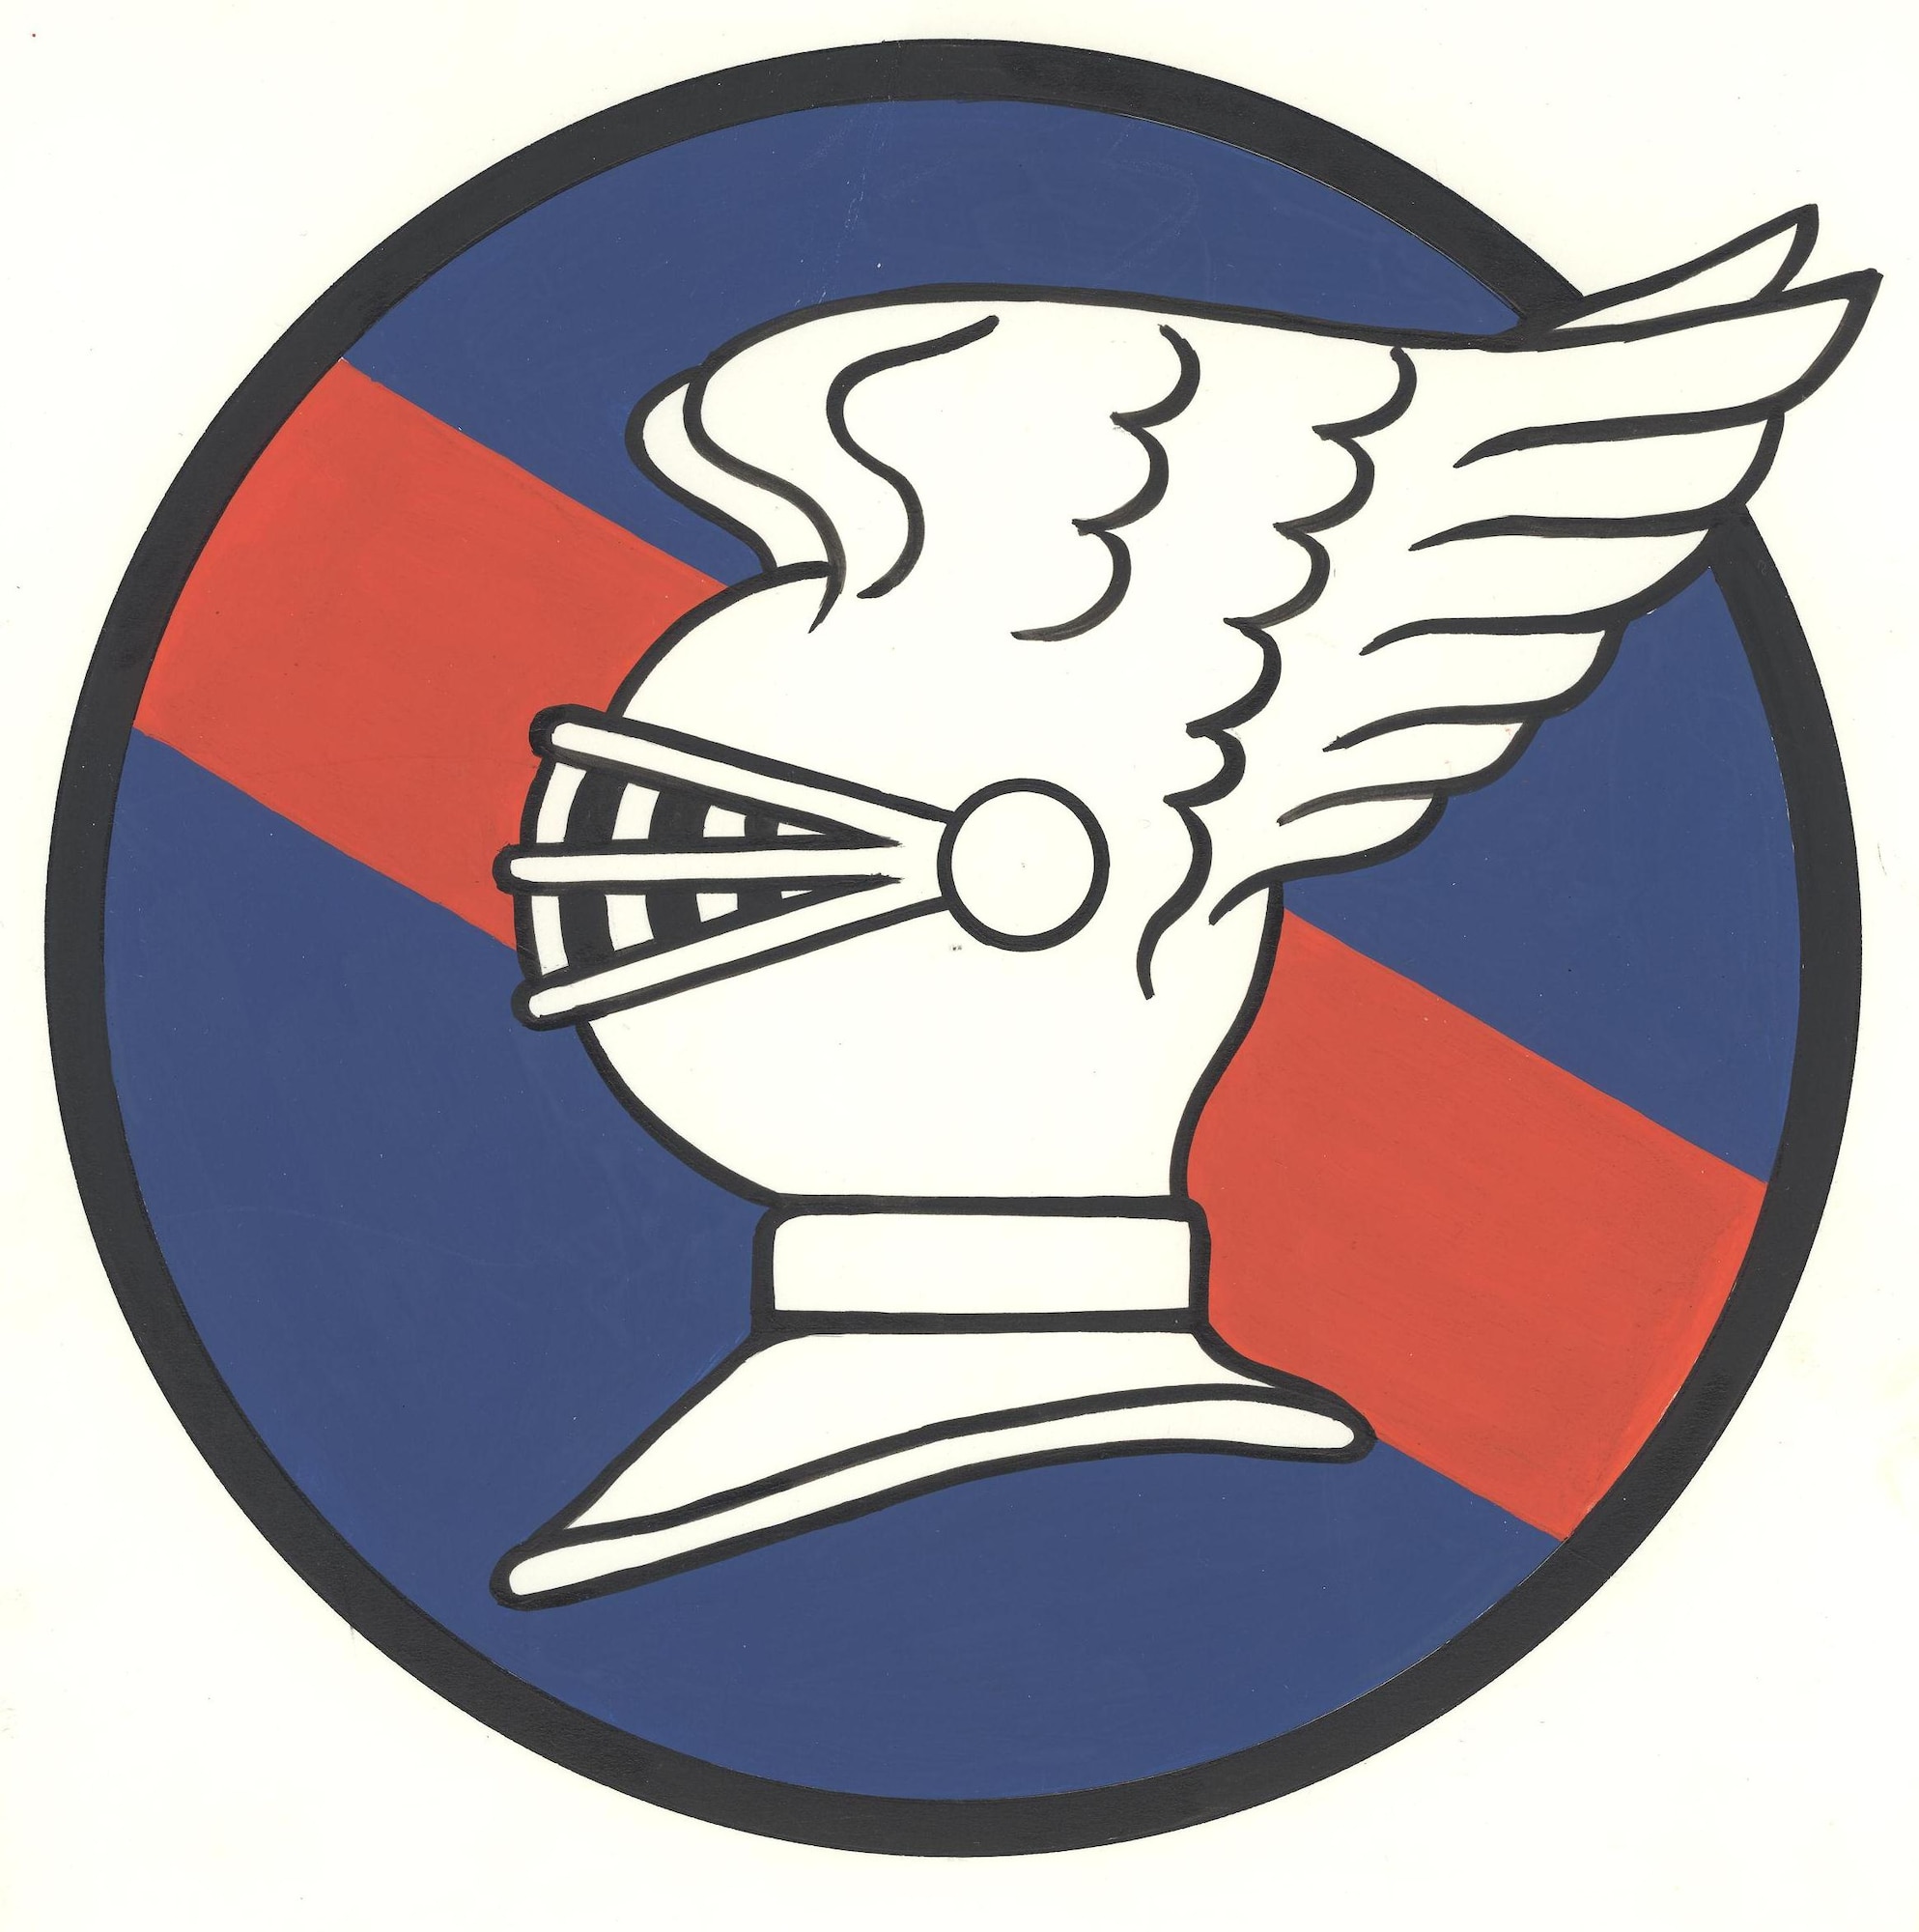 The original 9th Fighter Squadron emblem approved 1946. (Courtesy Graphic)